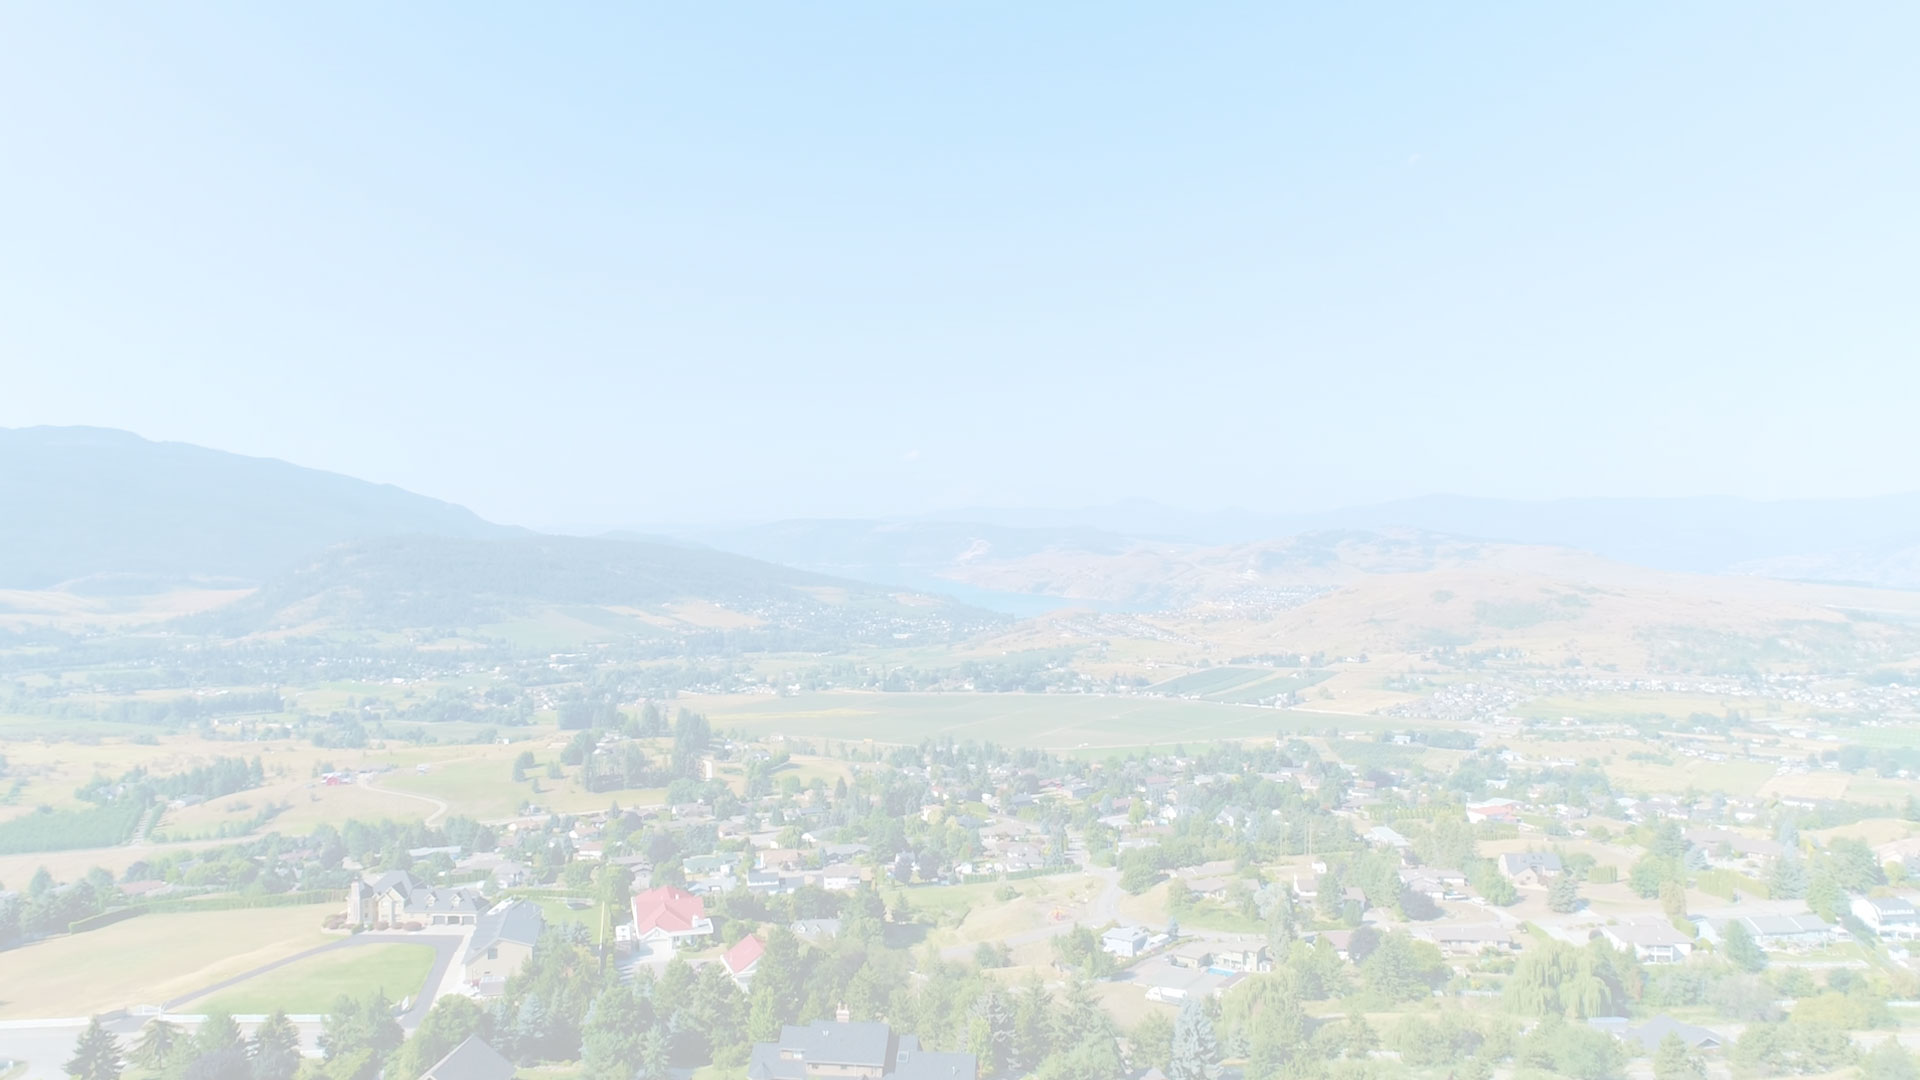 Stewart Pearson - Real Estate Listings Vernon - City View of Vernon - Header Image